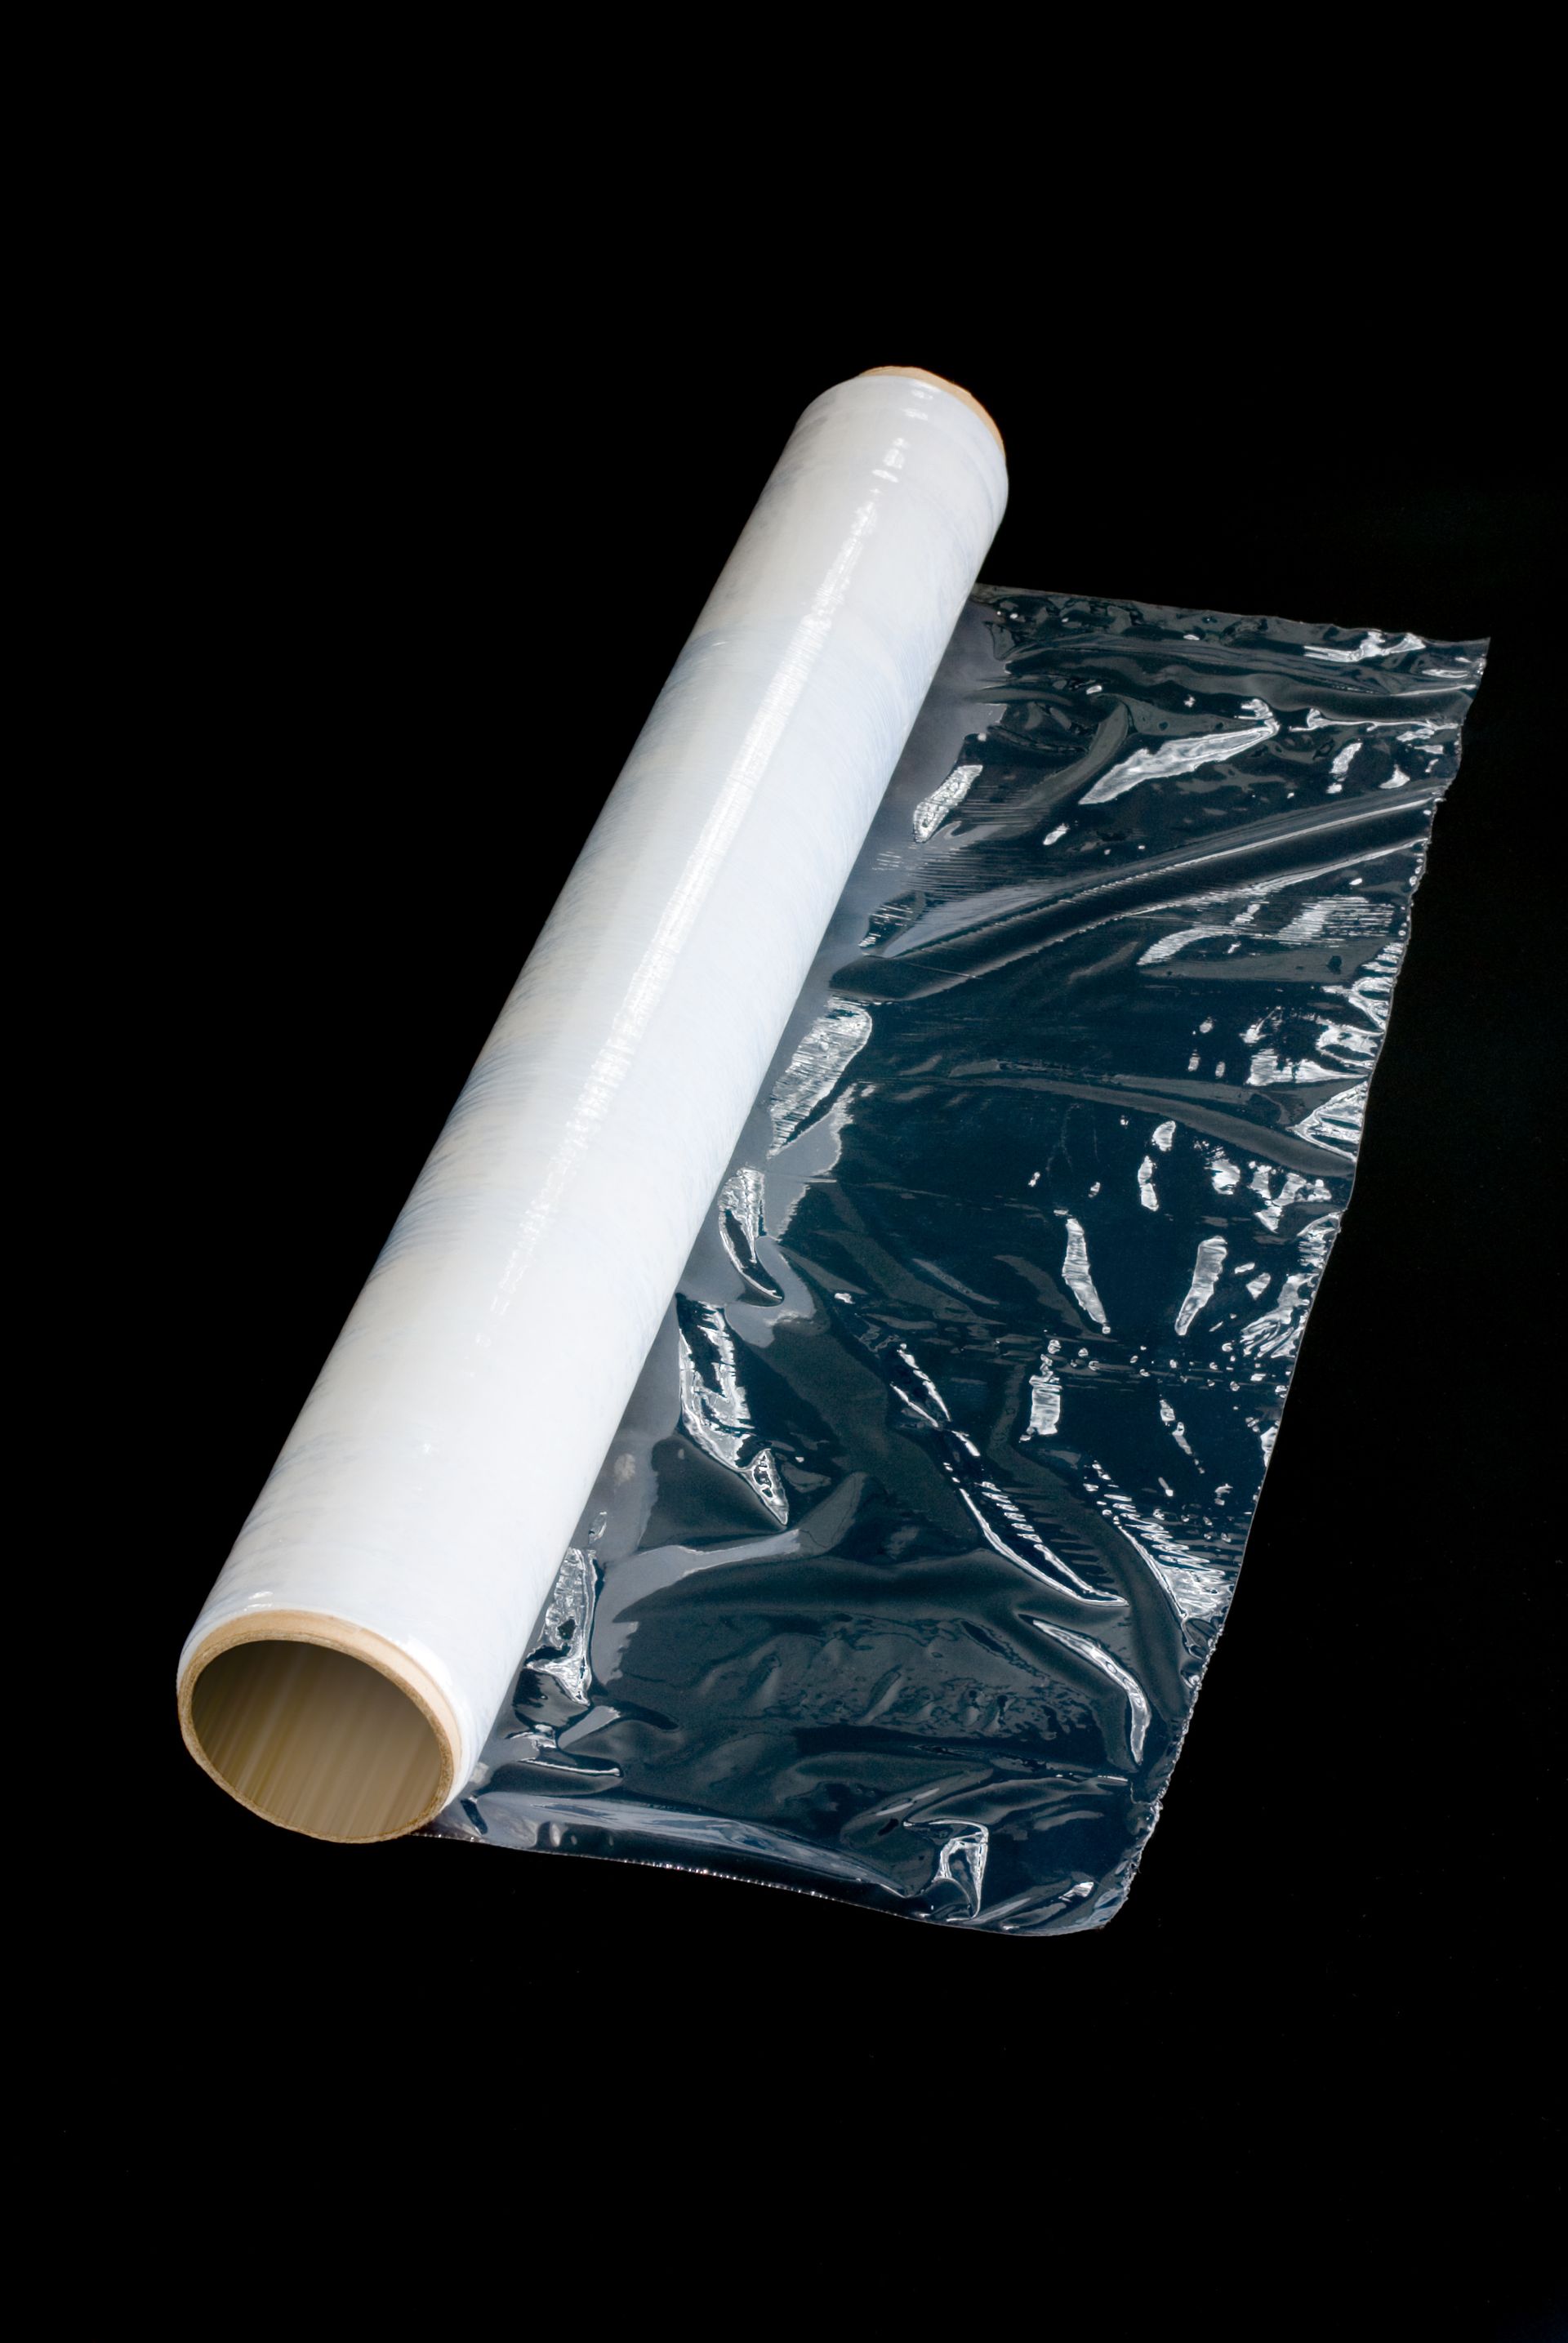 A roll of plastic wrap on a black background.